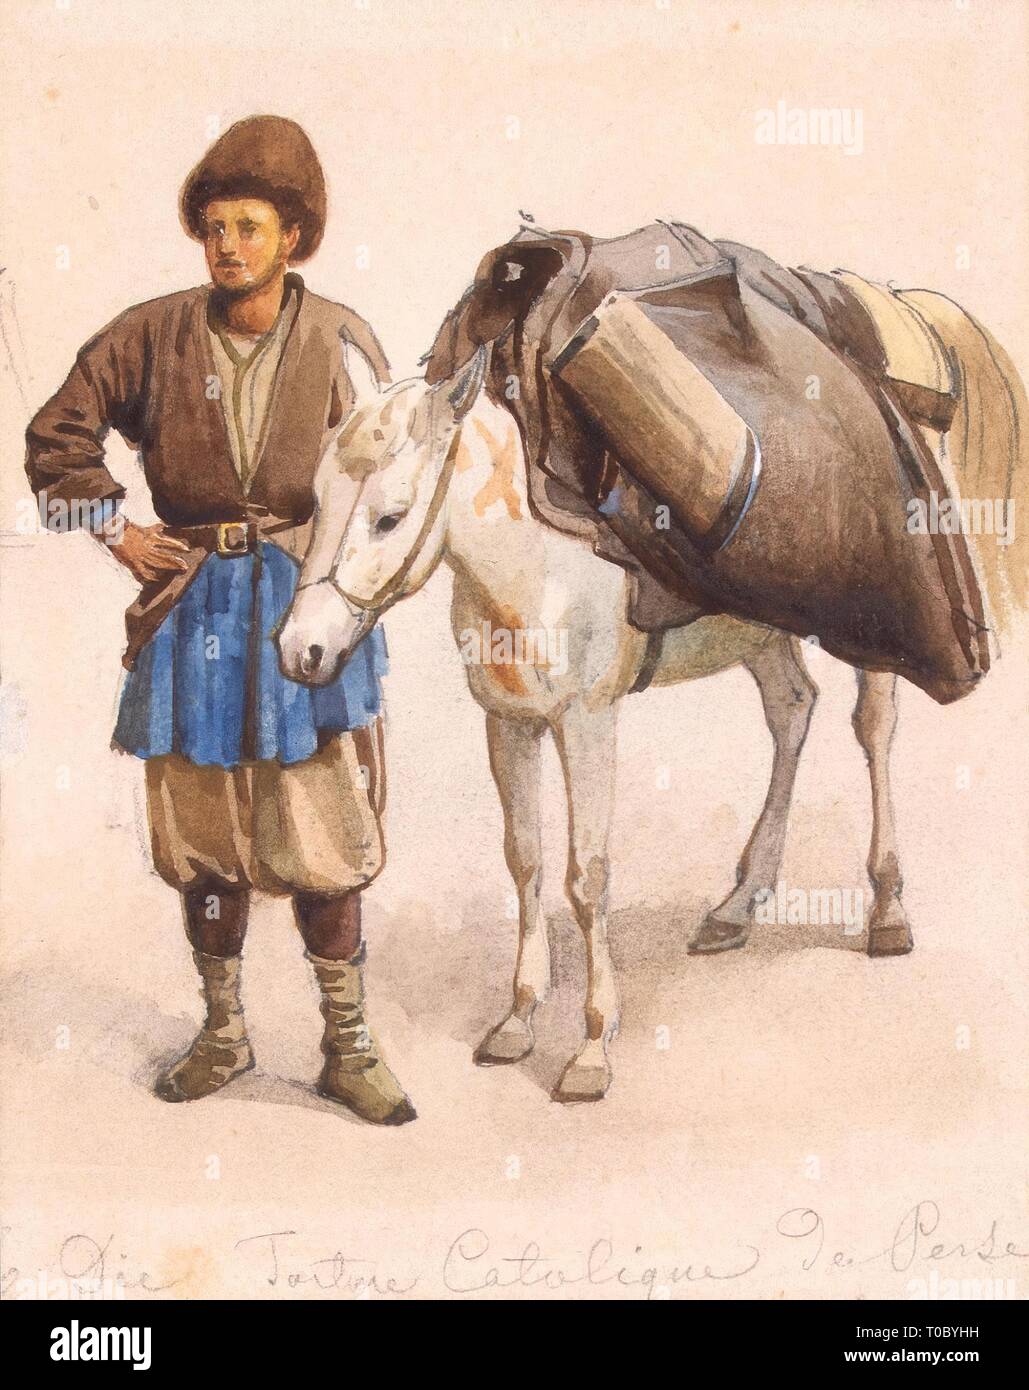 Tatar and Mule. Study'. Italy-Russia, 1870s. Dimensions: 11,7x94 cm.  Museum: State Hermitage, St. Petersburg. Author: LUIGI PREMAZZI Stock Photo  - Alamy